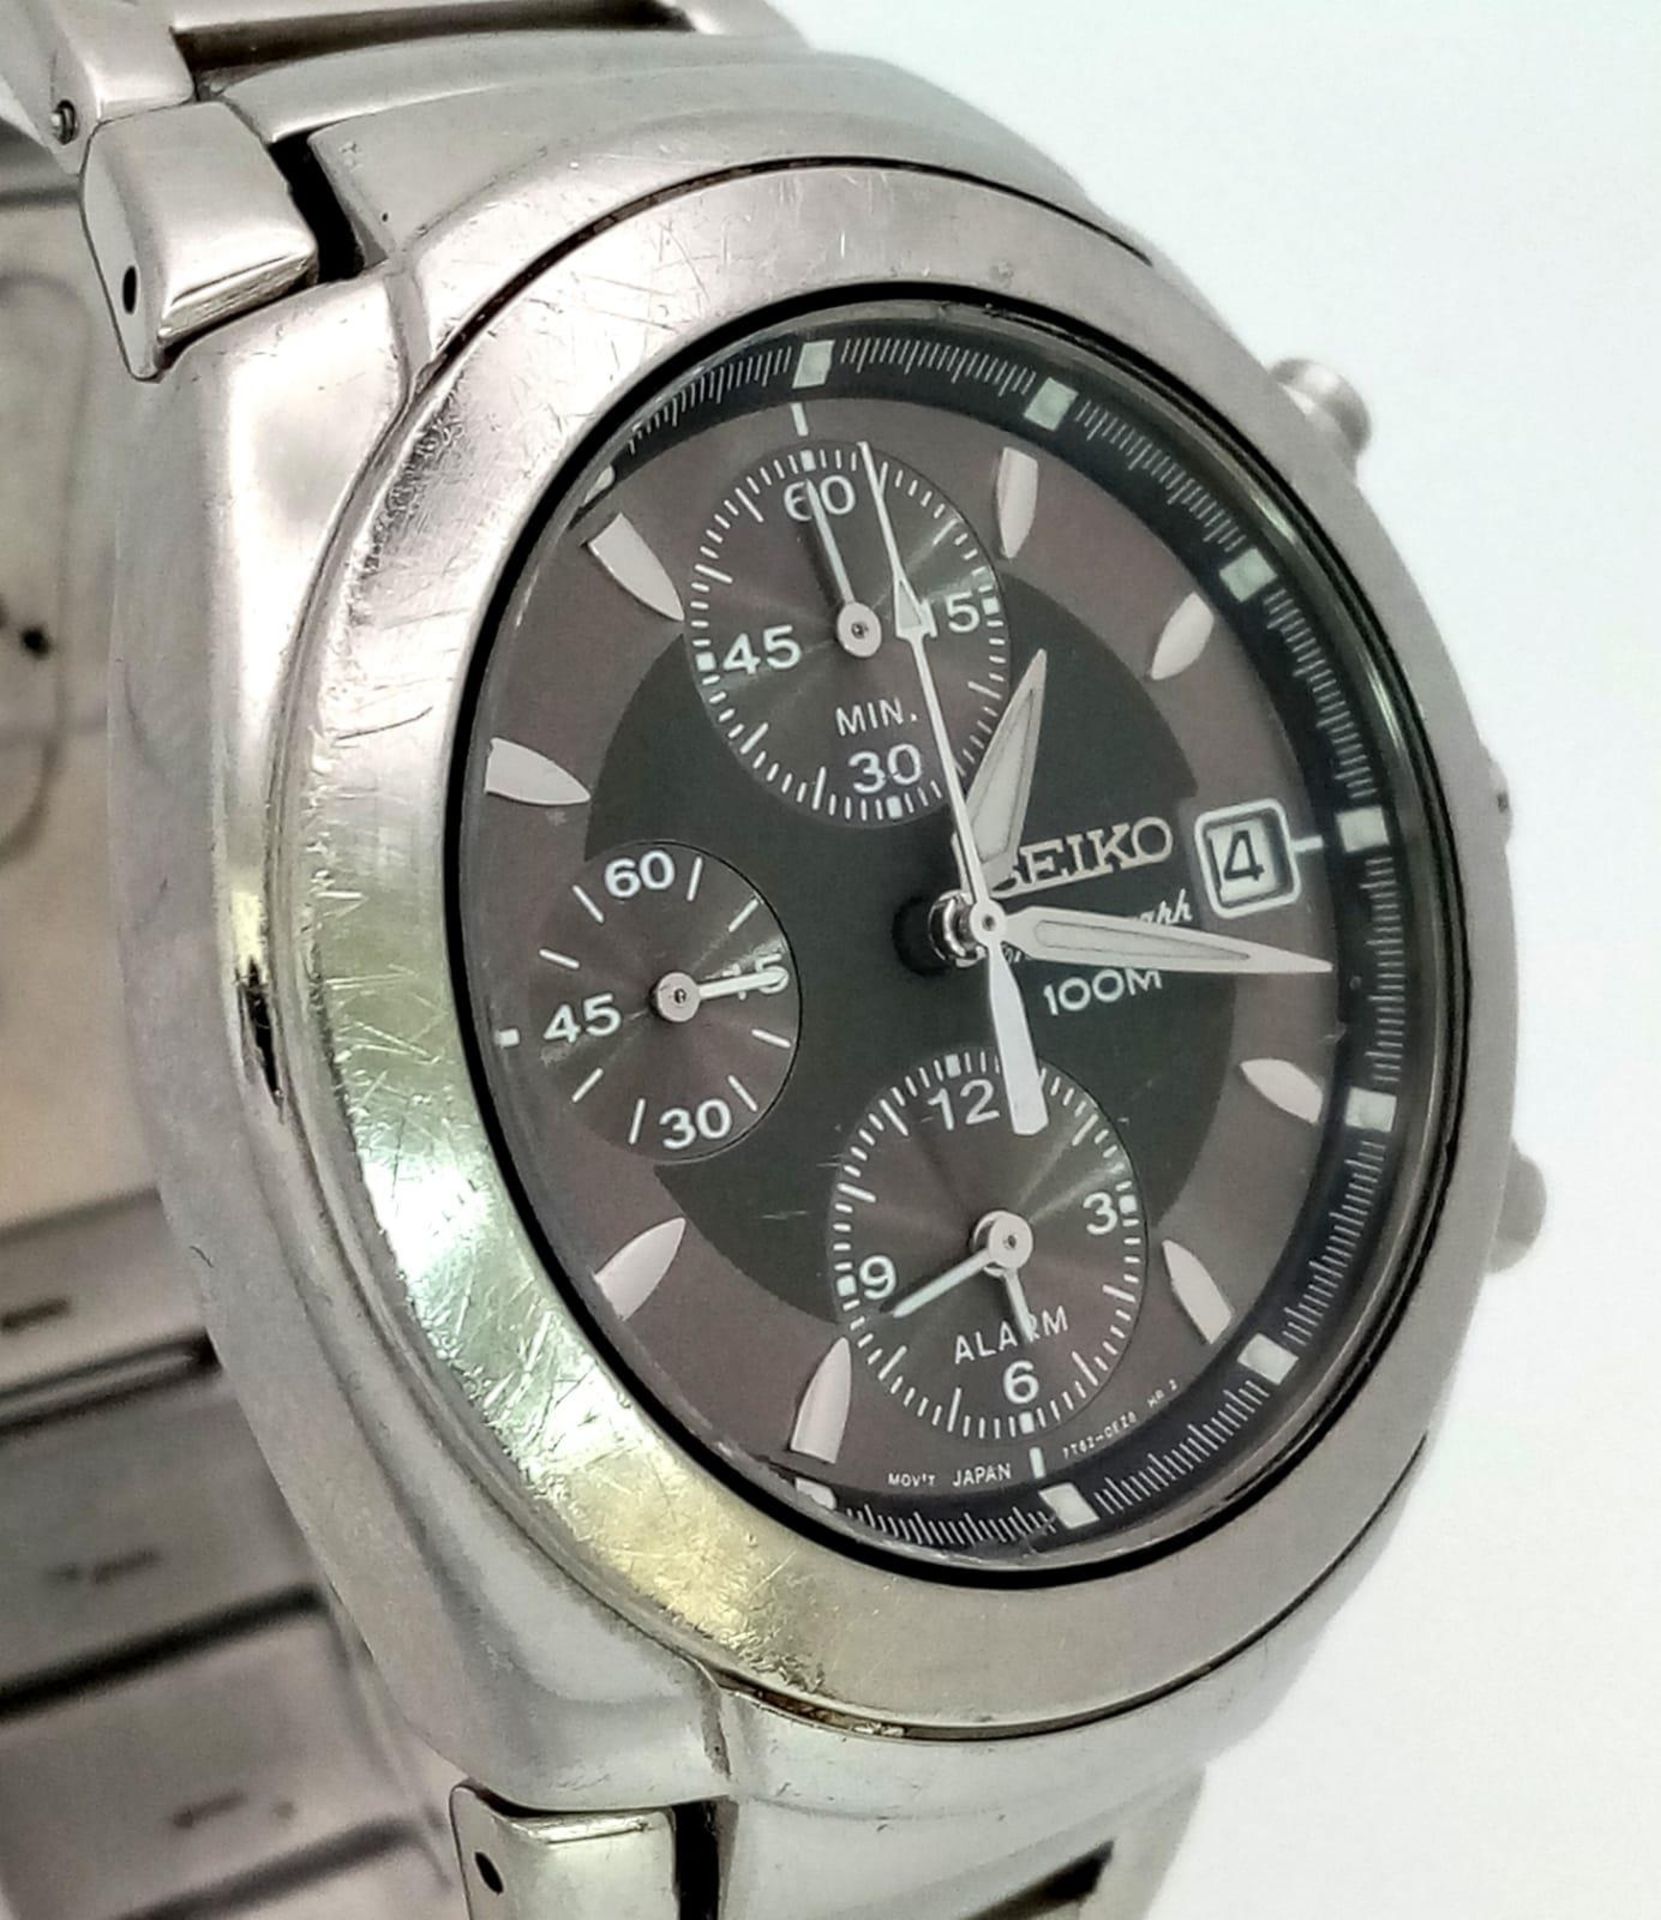 A Seiko Chronograph Quartz Gens Watch. Stainless steel strap and case - 40mm. Silver tone dial - Image 4 of 13